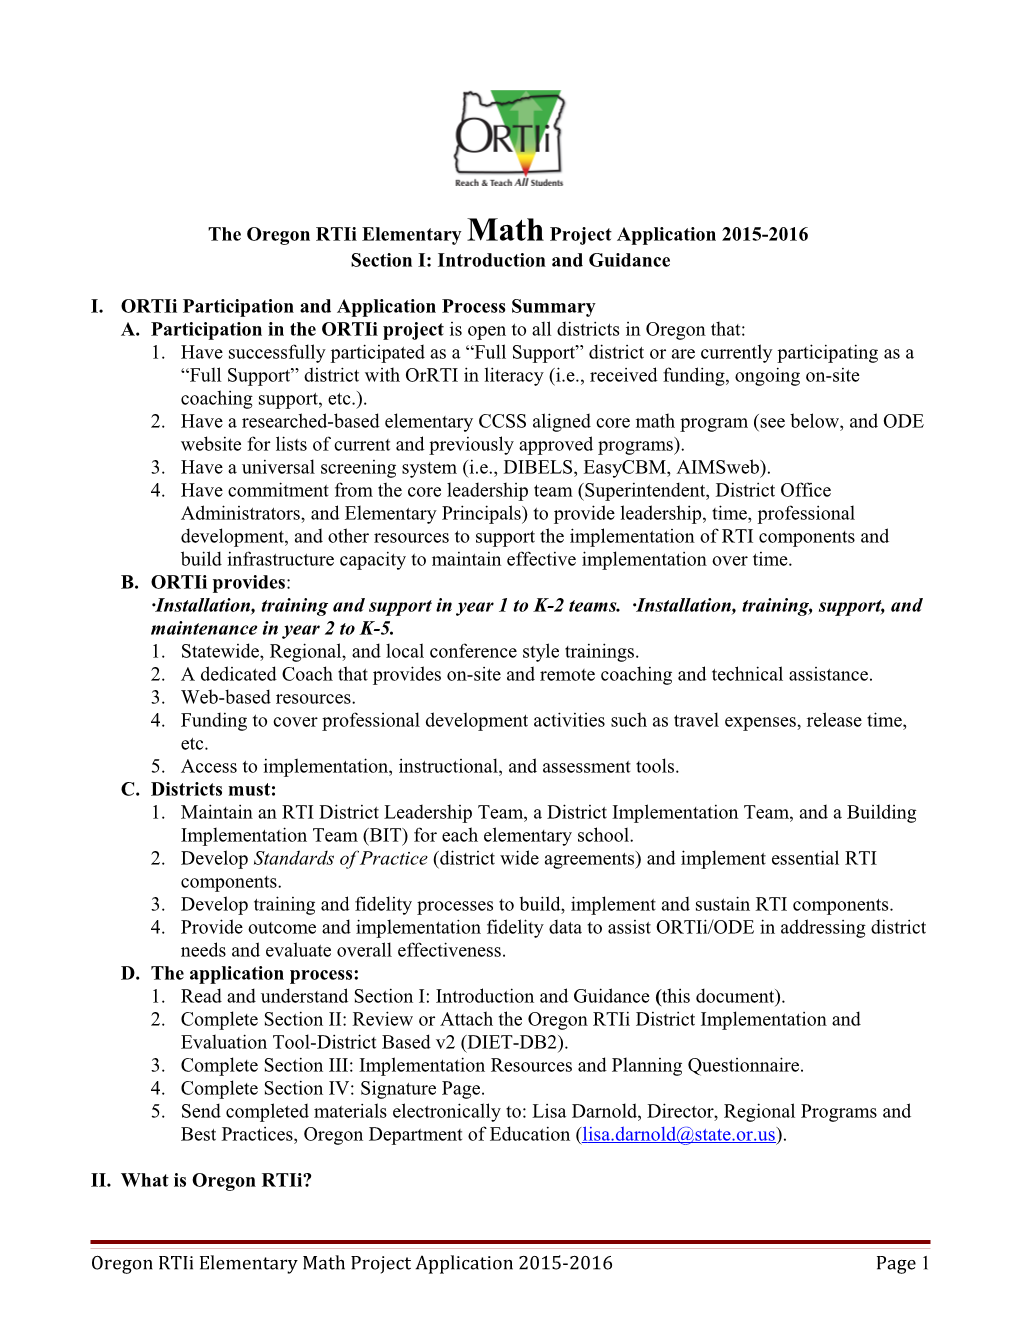 The Oregon Rtii Elementary Math Project Application 2015-2016